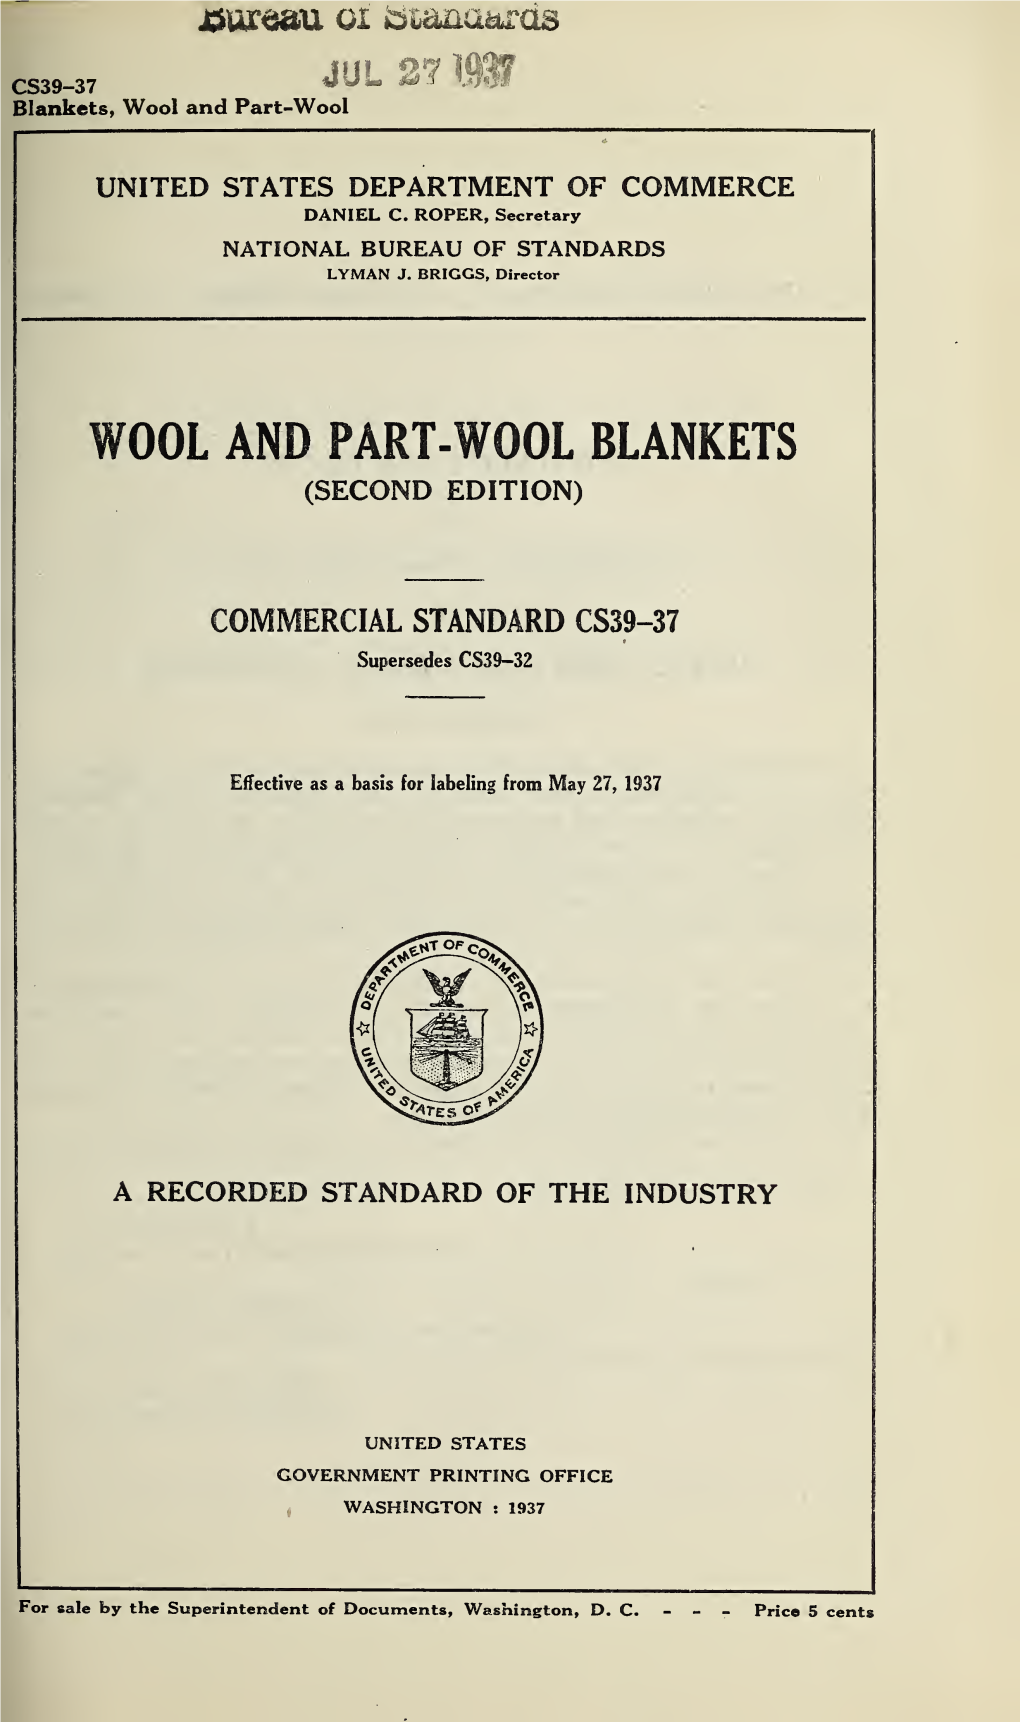 Wool and Part-Wool Blankets (Second Edition)